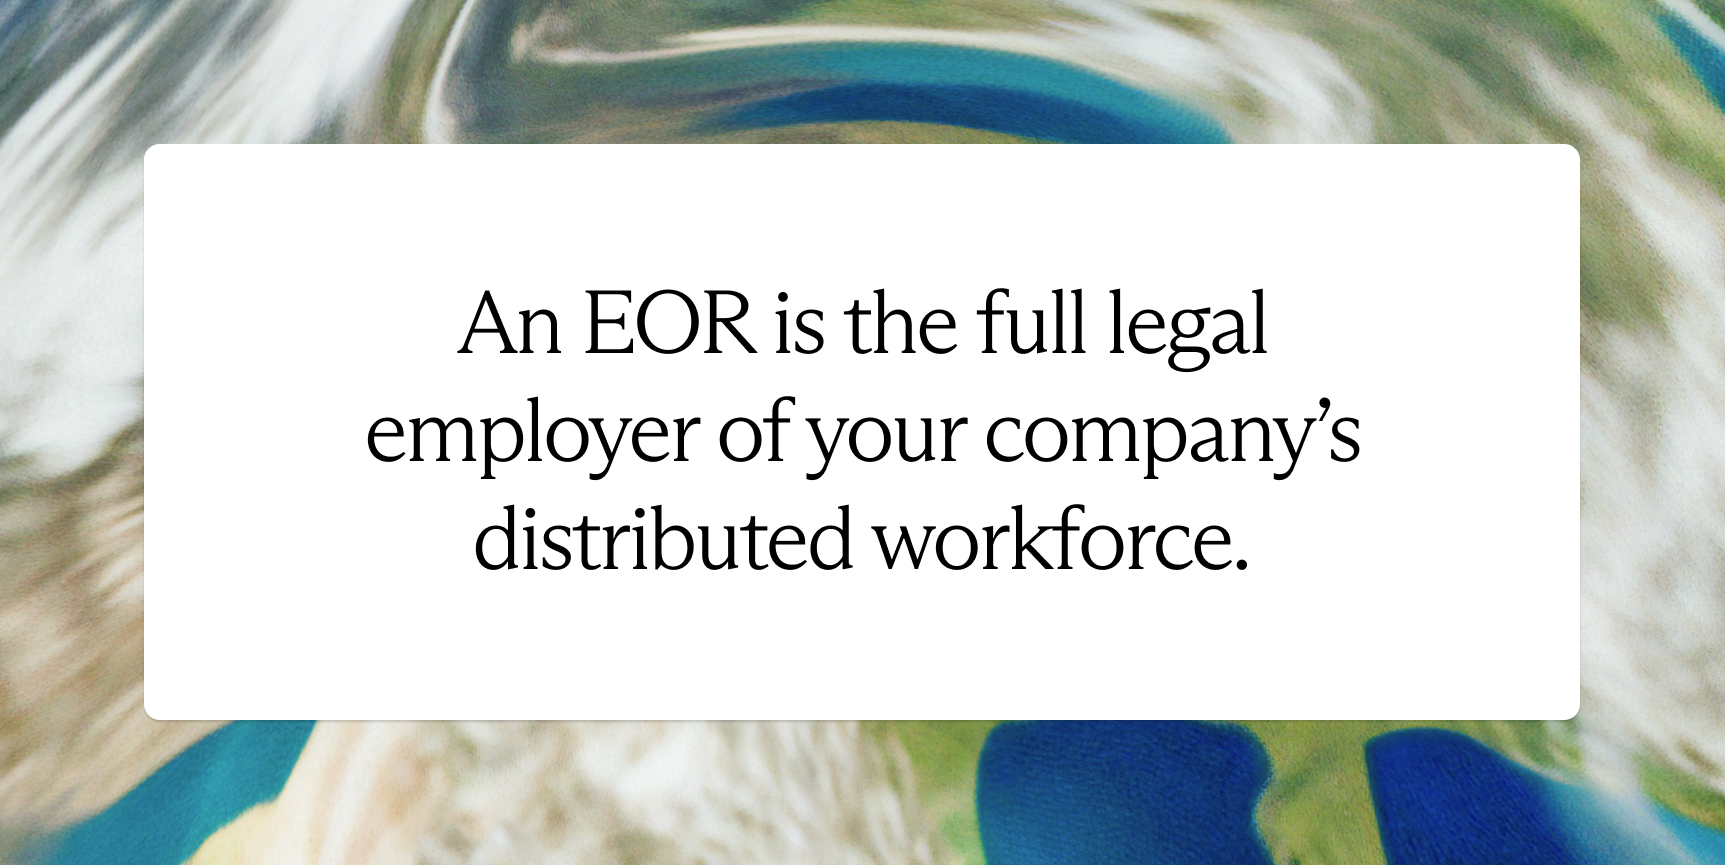 An EOR is the full legal employer of your company's distributed workforce